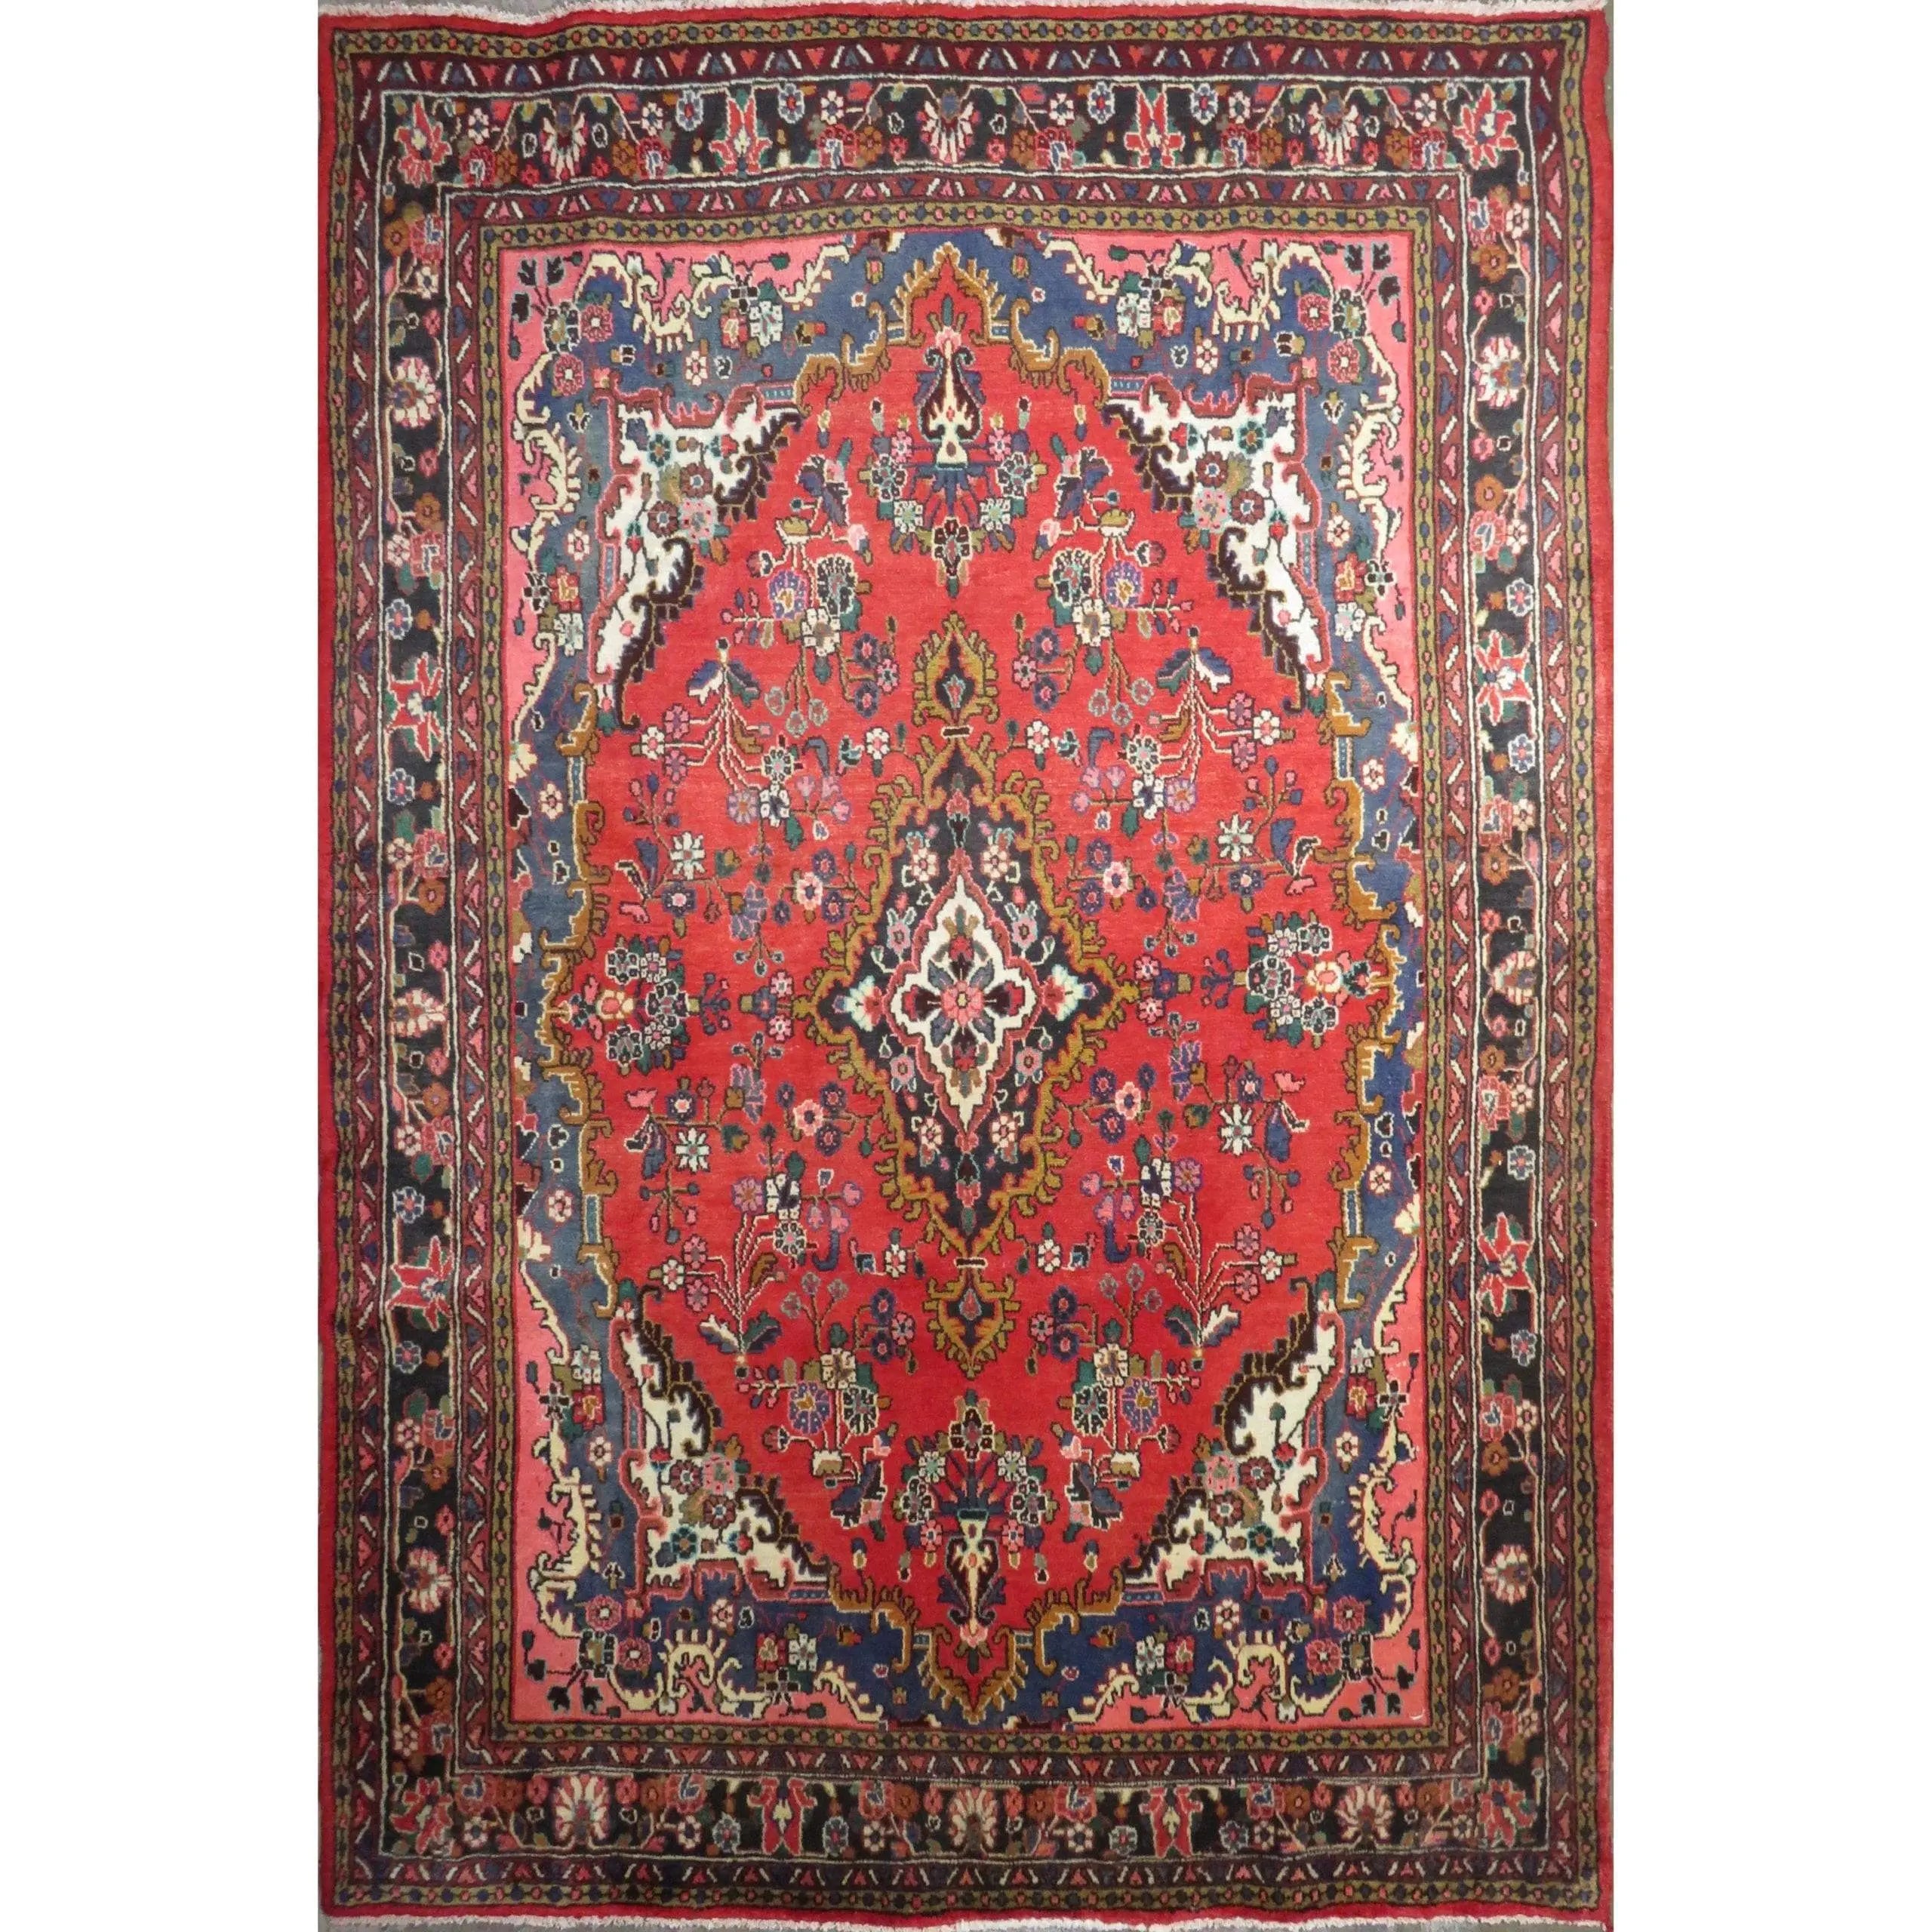 Hand-Knotted Persian Wool Rug _ Luxurious Vintage Design, 10'5" x 7'0", Artisan Crafted